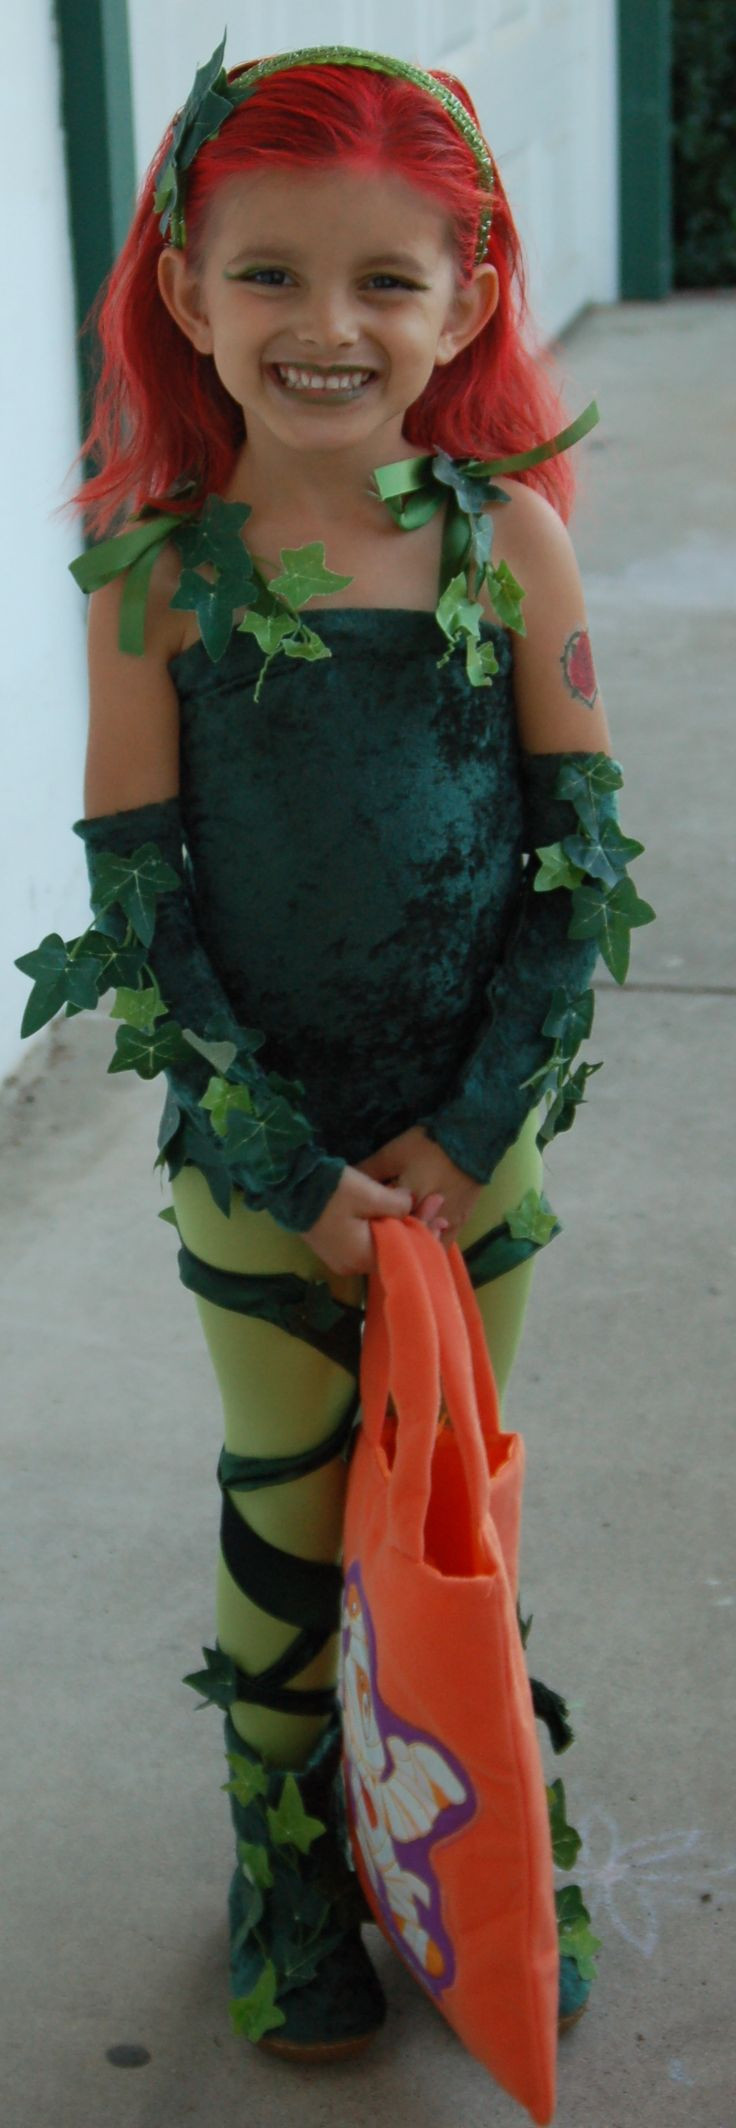 Poison Ivy DIY Costume
 607 best Costumes 2 images on Pinterest